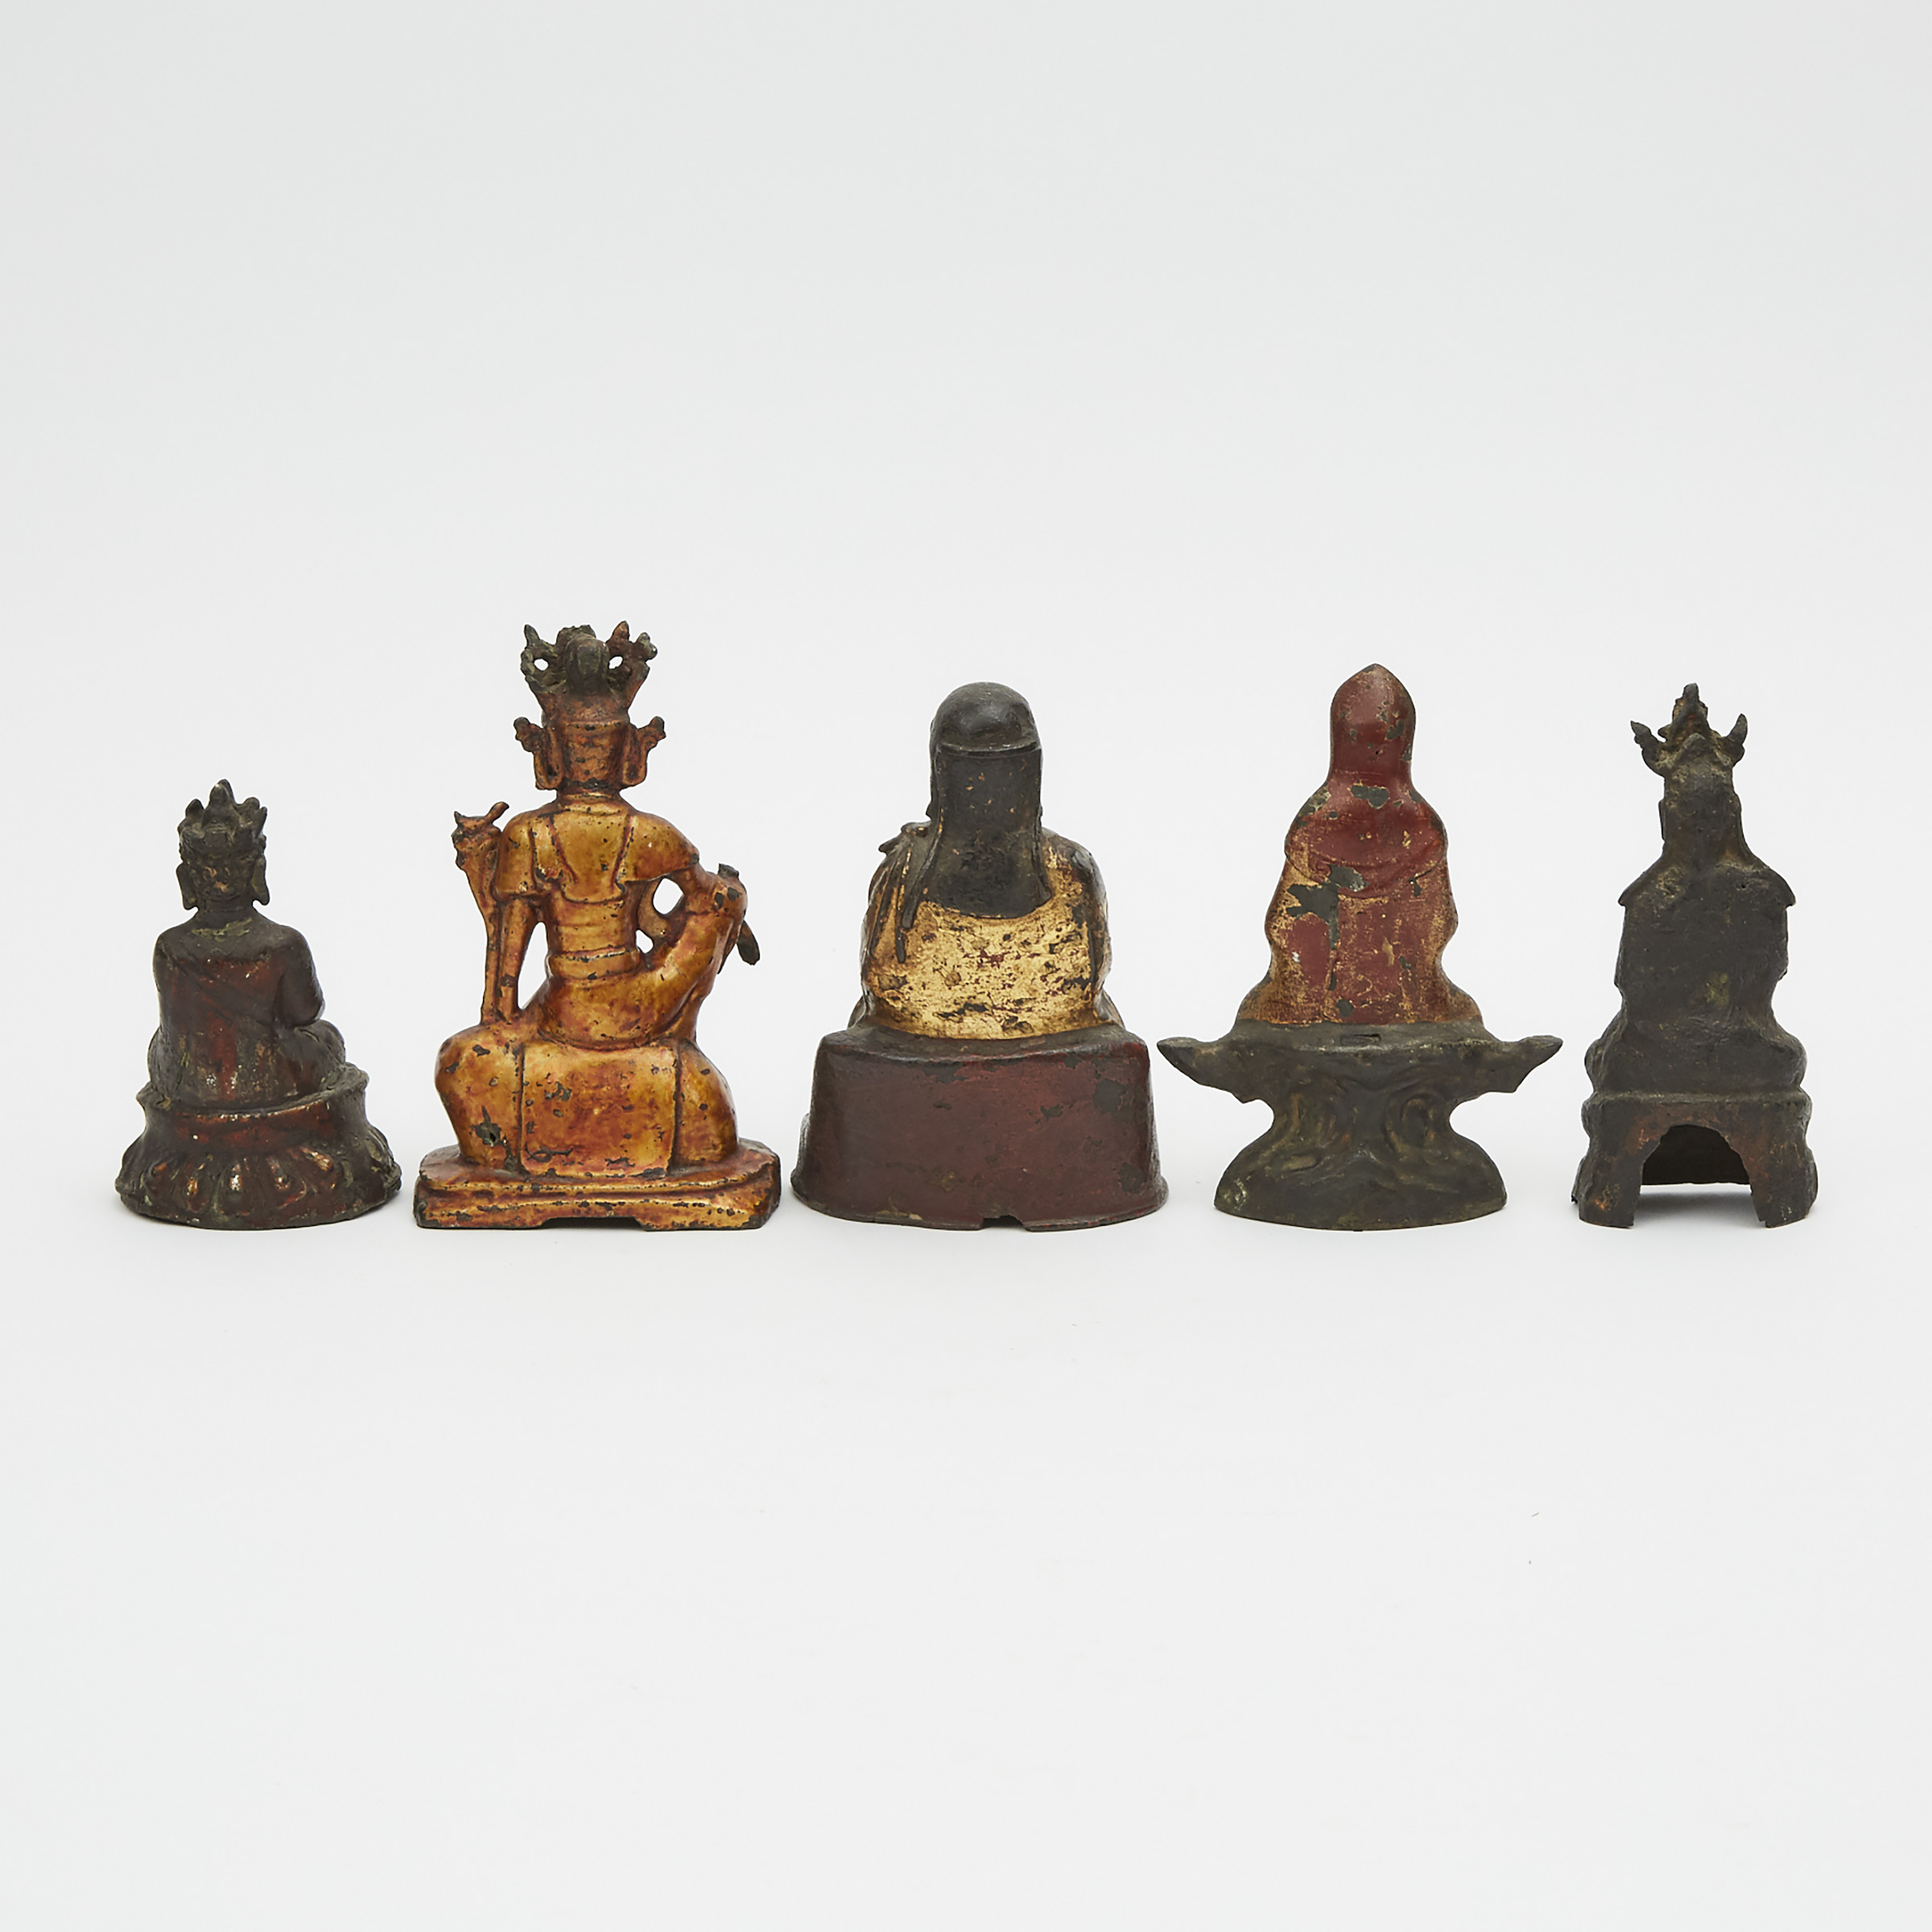 A Group of Five Bronze Buddha Figures, Ming Dynasty and Later